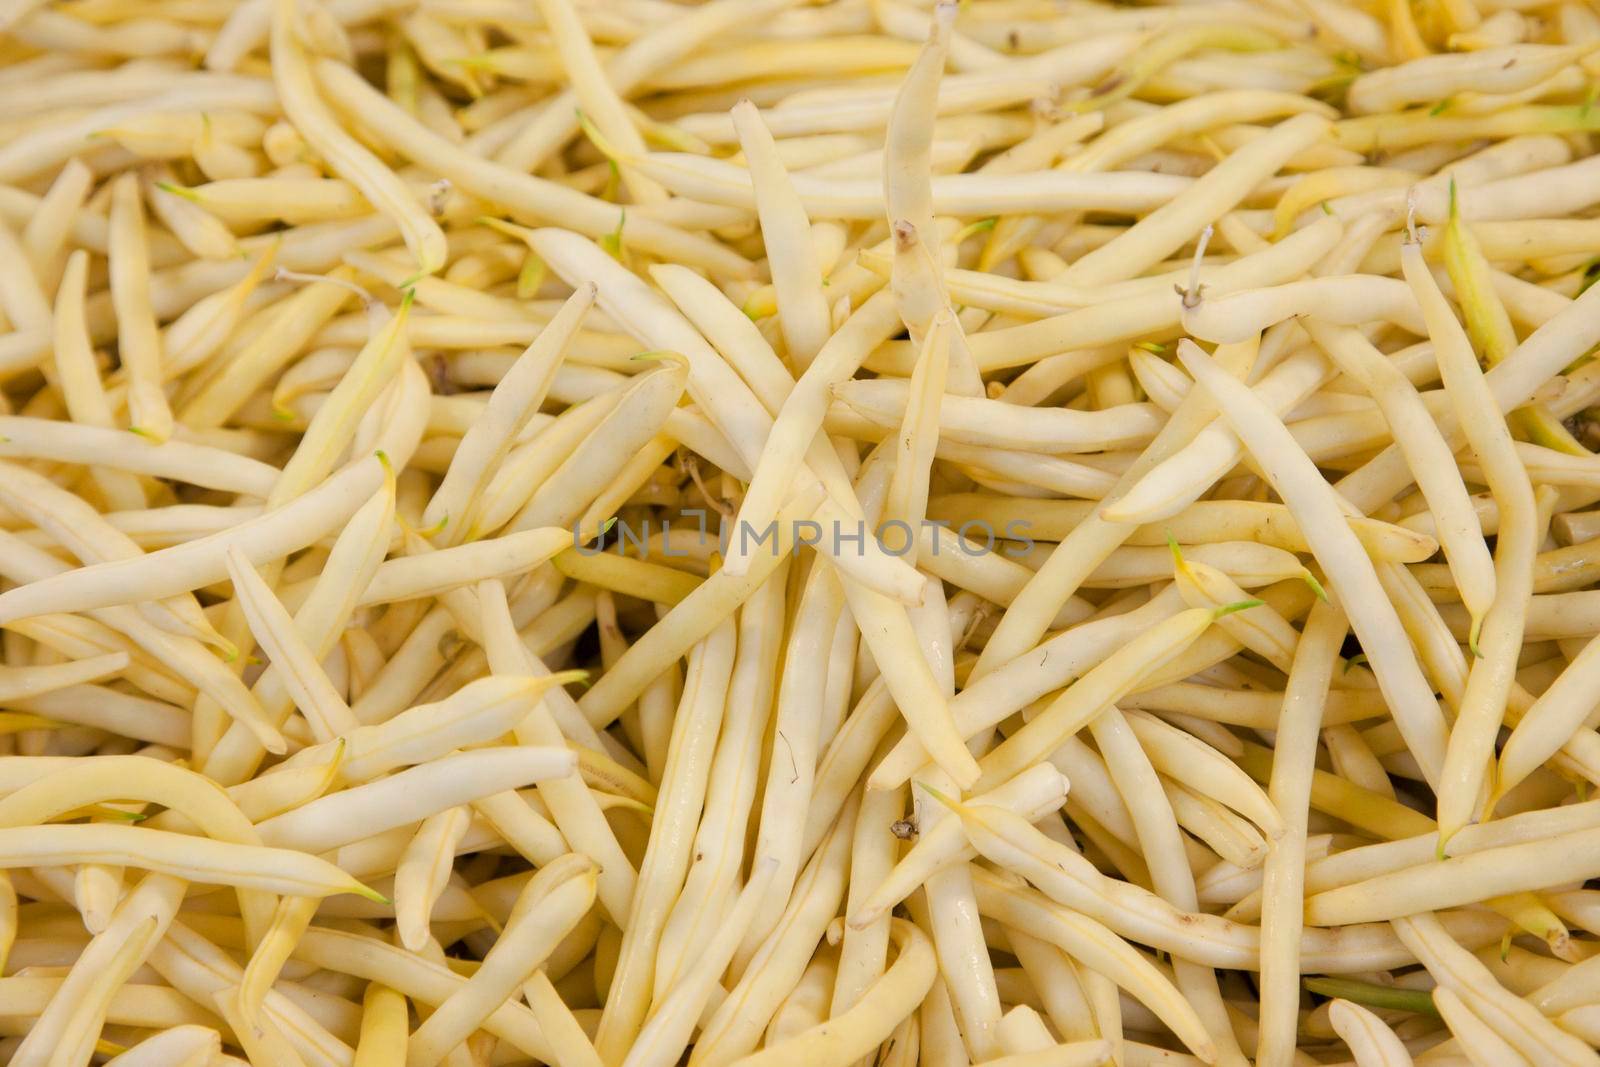 a group of yellow waxy string beans at a market